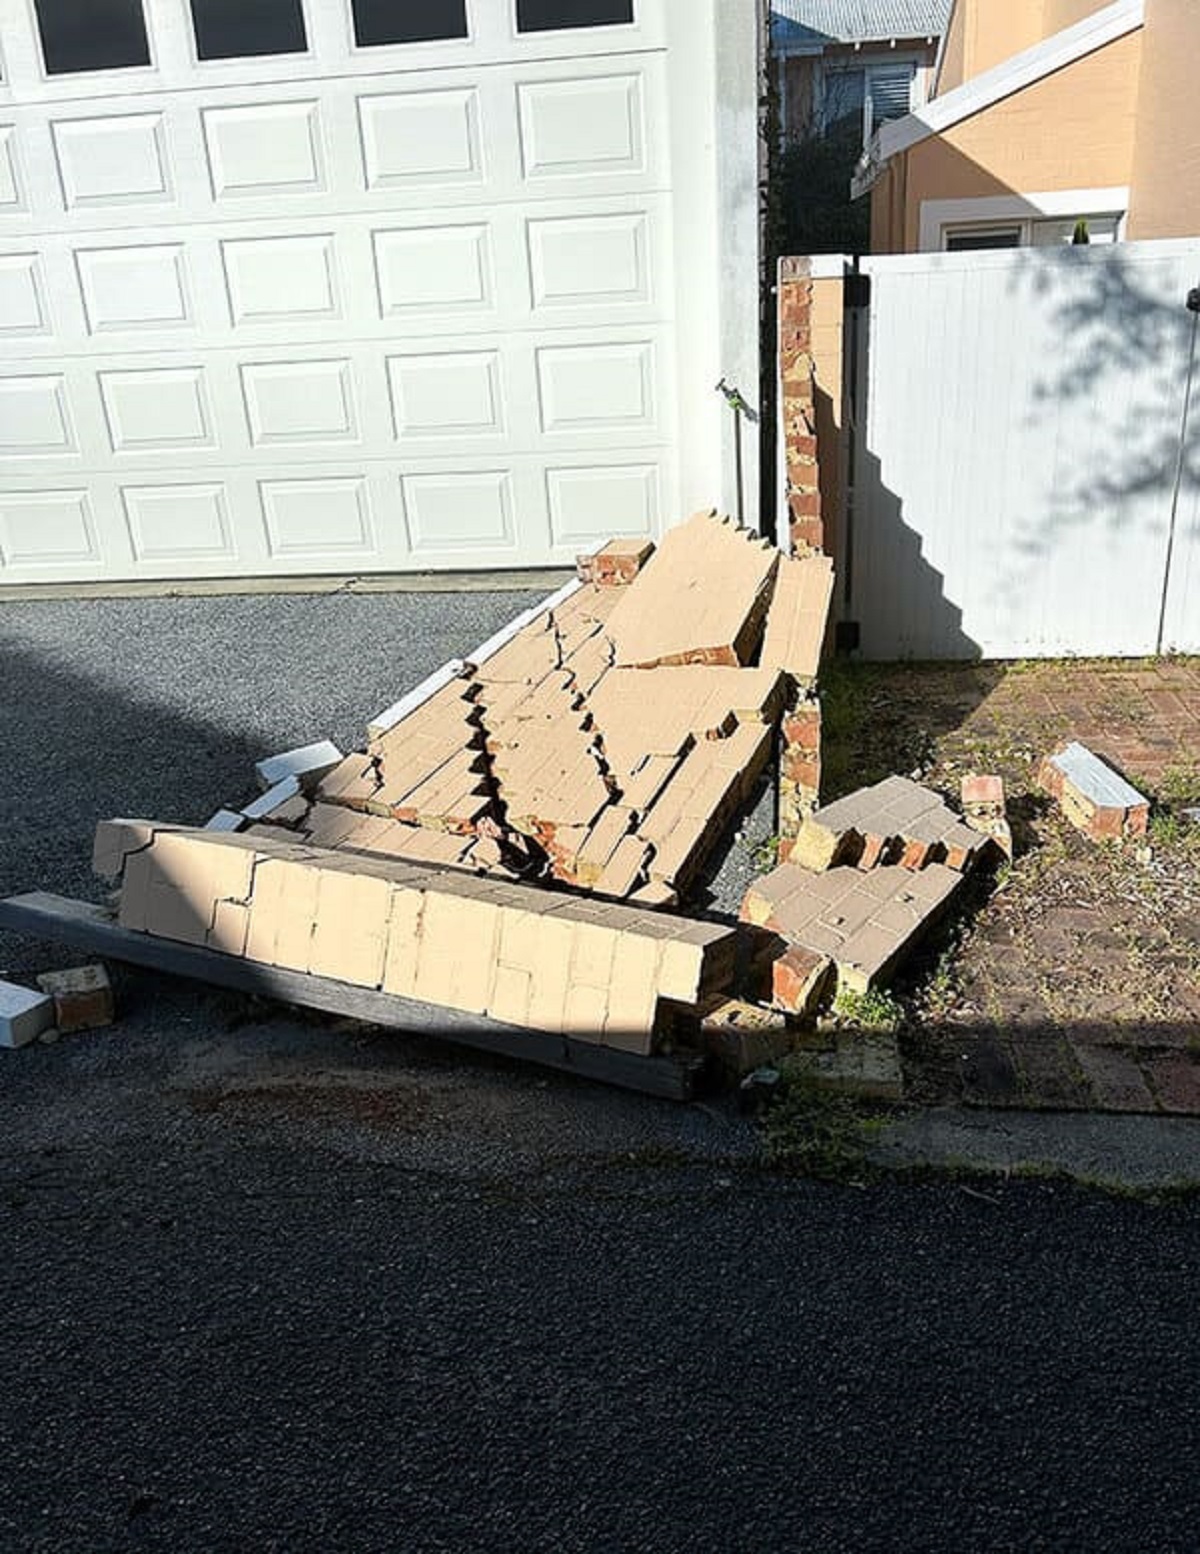 “My Neighbor Drove Into Part Of My Back Fence 2 Months Ago And Hasn’t Cleaned It Up”